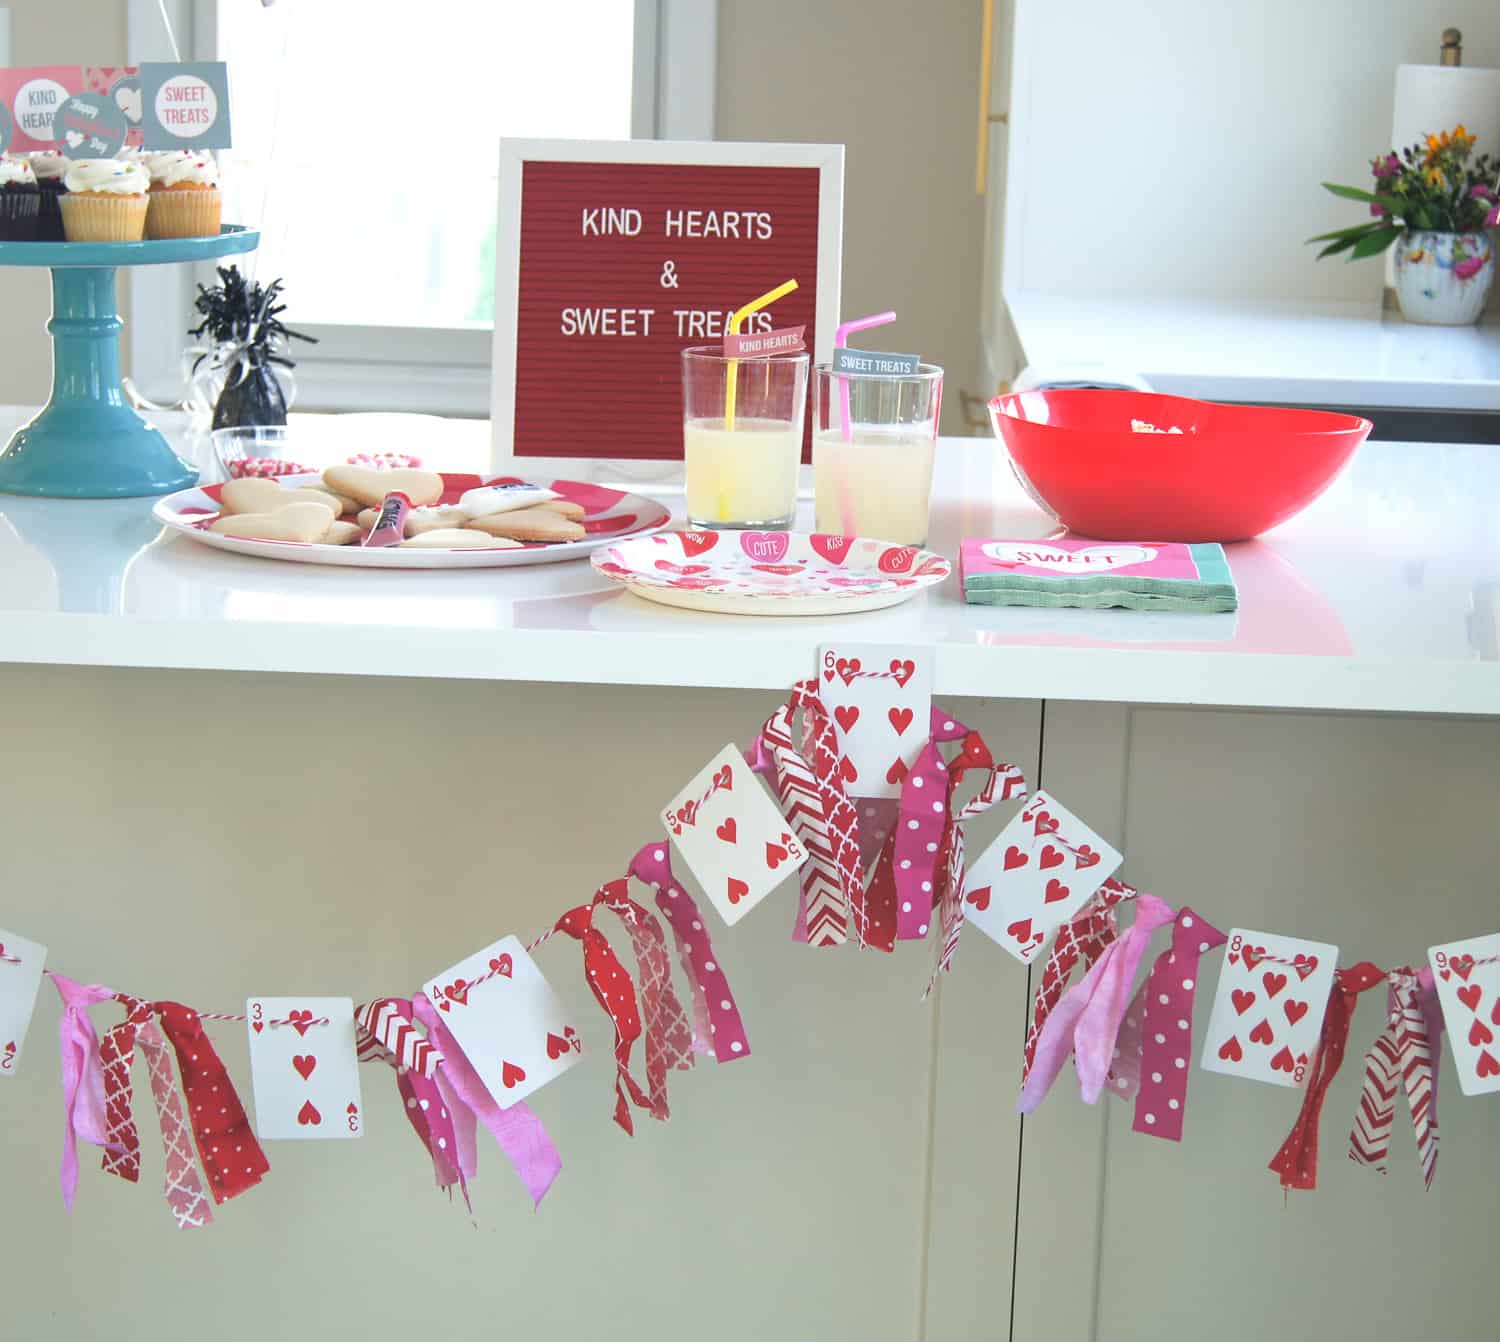 Valentine's play date food table with cupcakes, popcorn, and lemonade